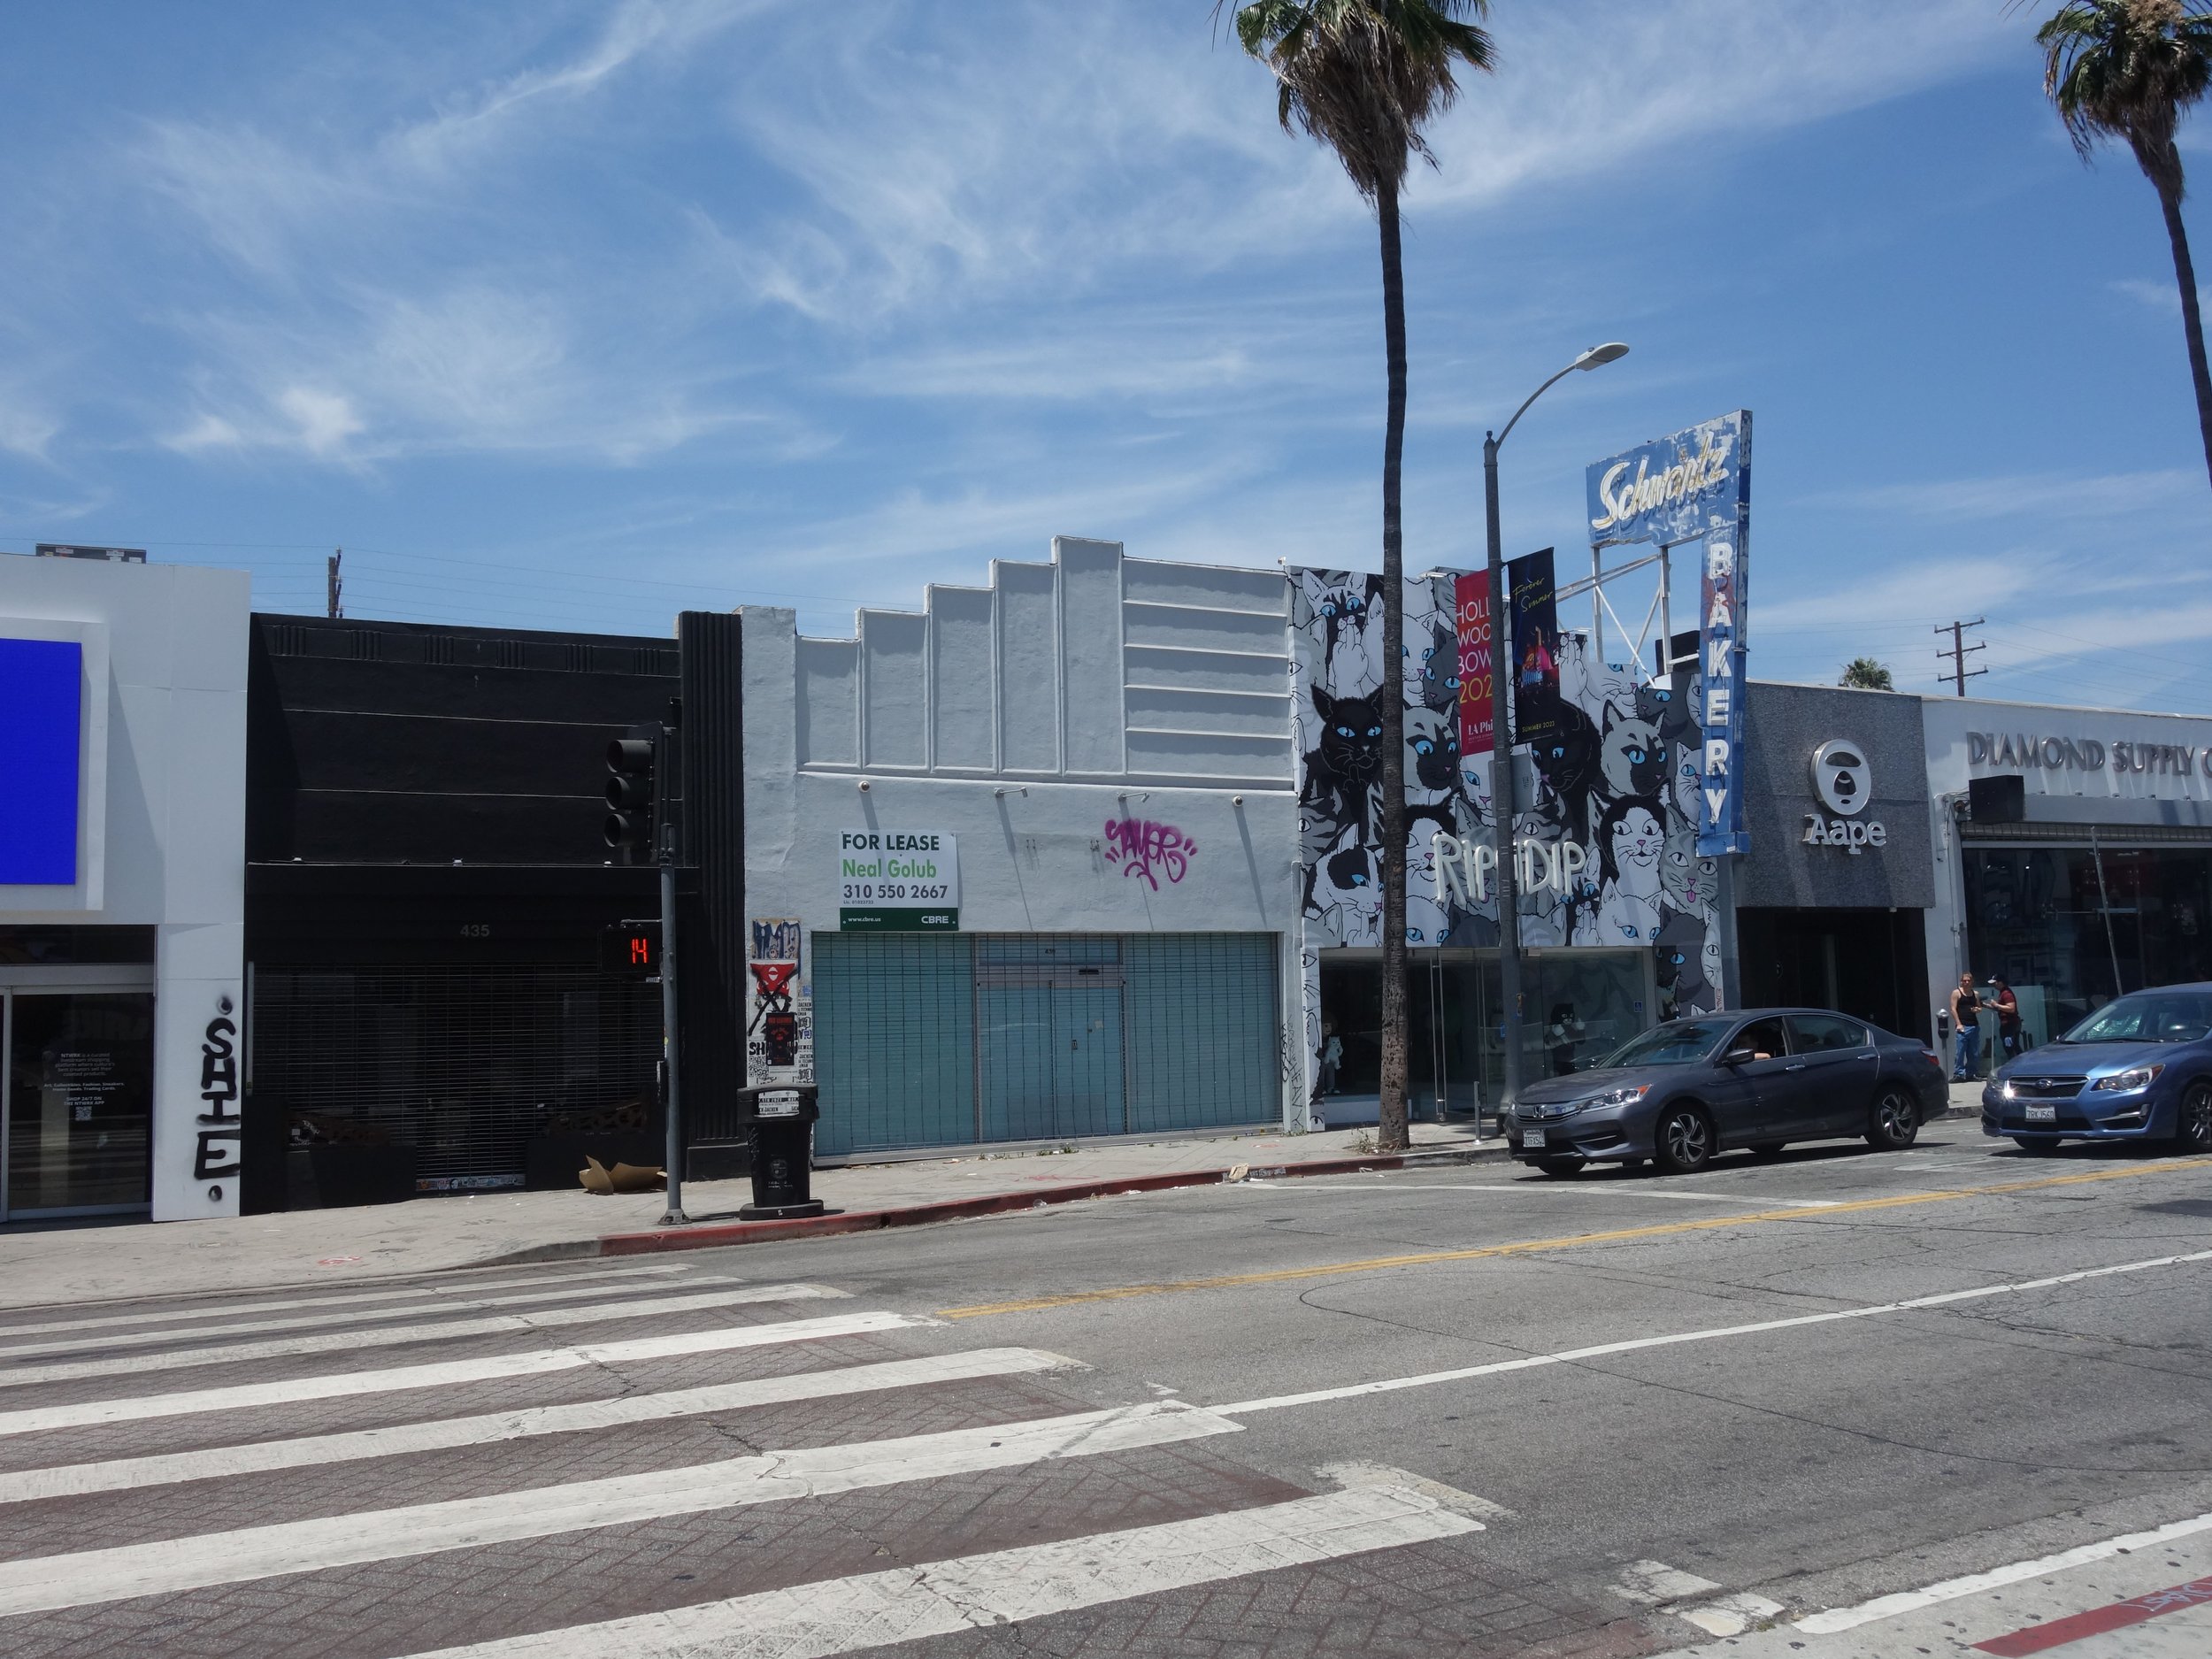  Here is the soon-to-be Supreme retail store on Fairfax Ave., where we will be installing the skate bowl.  